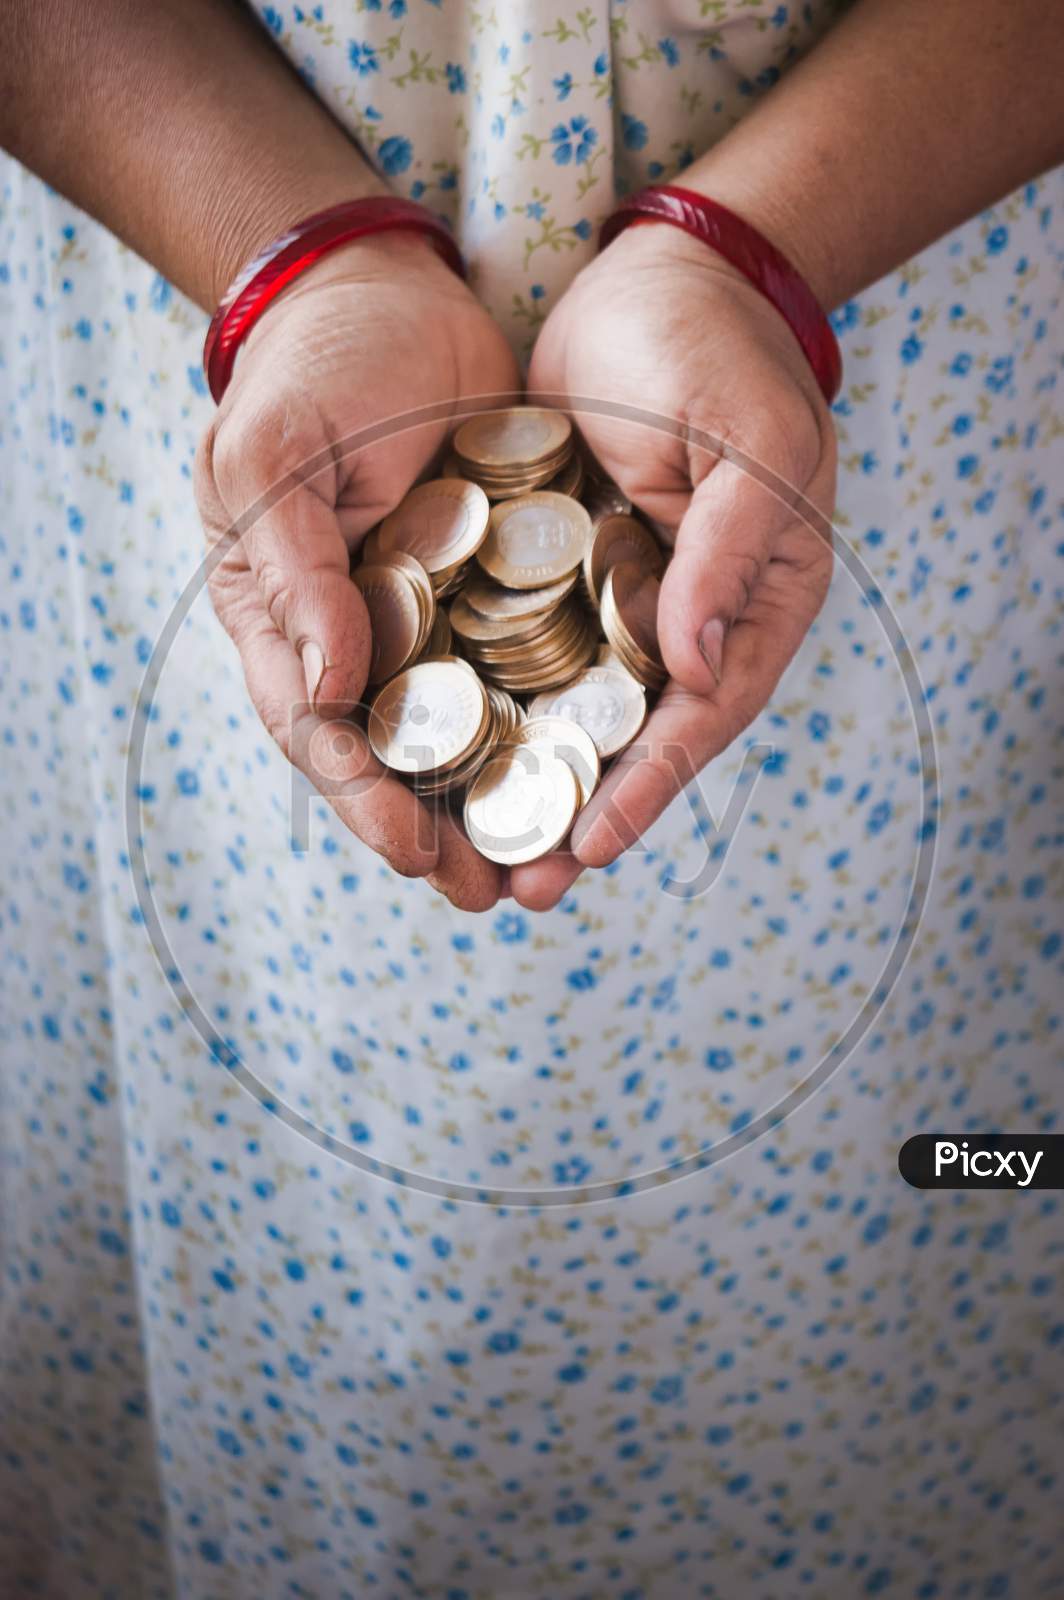 A Lady Holding Coins In A Gesture Of Giving Or Showing It